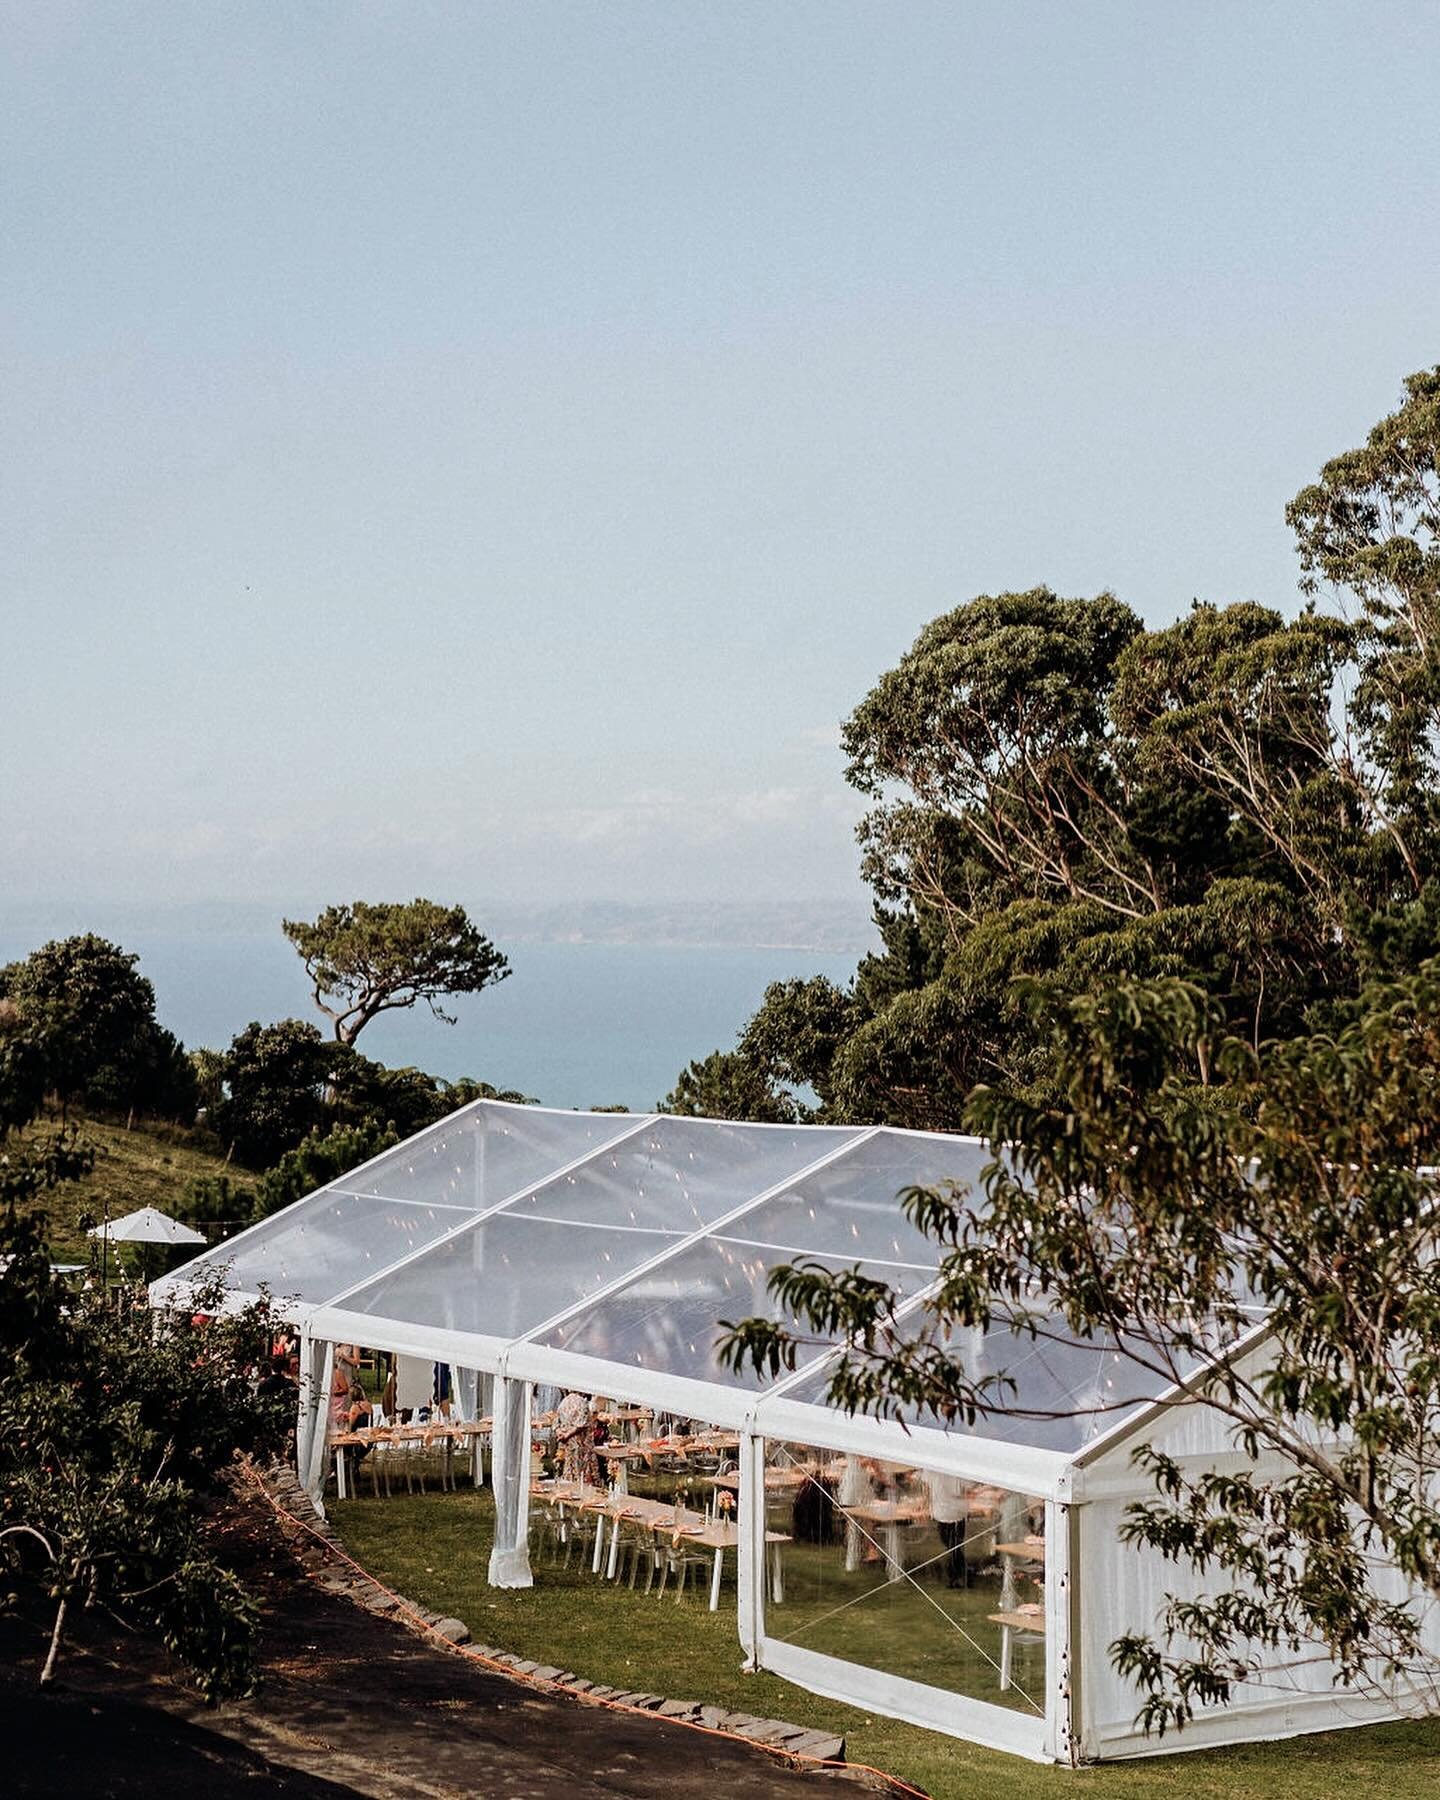 When your first  party as husband &amp; wife gets to be here ✨
⠀⠀⠀⠀⠀⠀⠀⠀⠀
Photography @nita.co.nz | Marquee &amp; Furniture @loveclubhire | Venue @the_glasshouse_at_block295 | Glassware @royallaboratorie | Napkins @tble__linen__hire | Signage &amp; Me